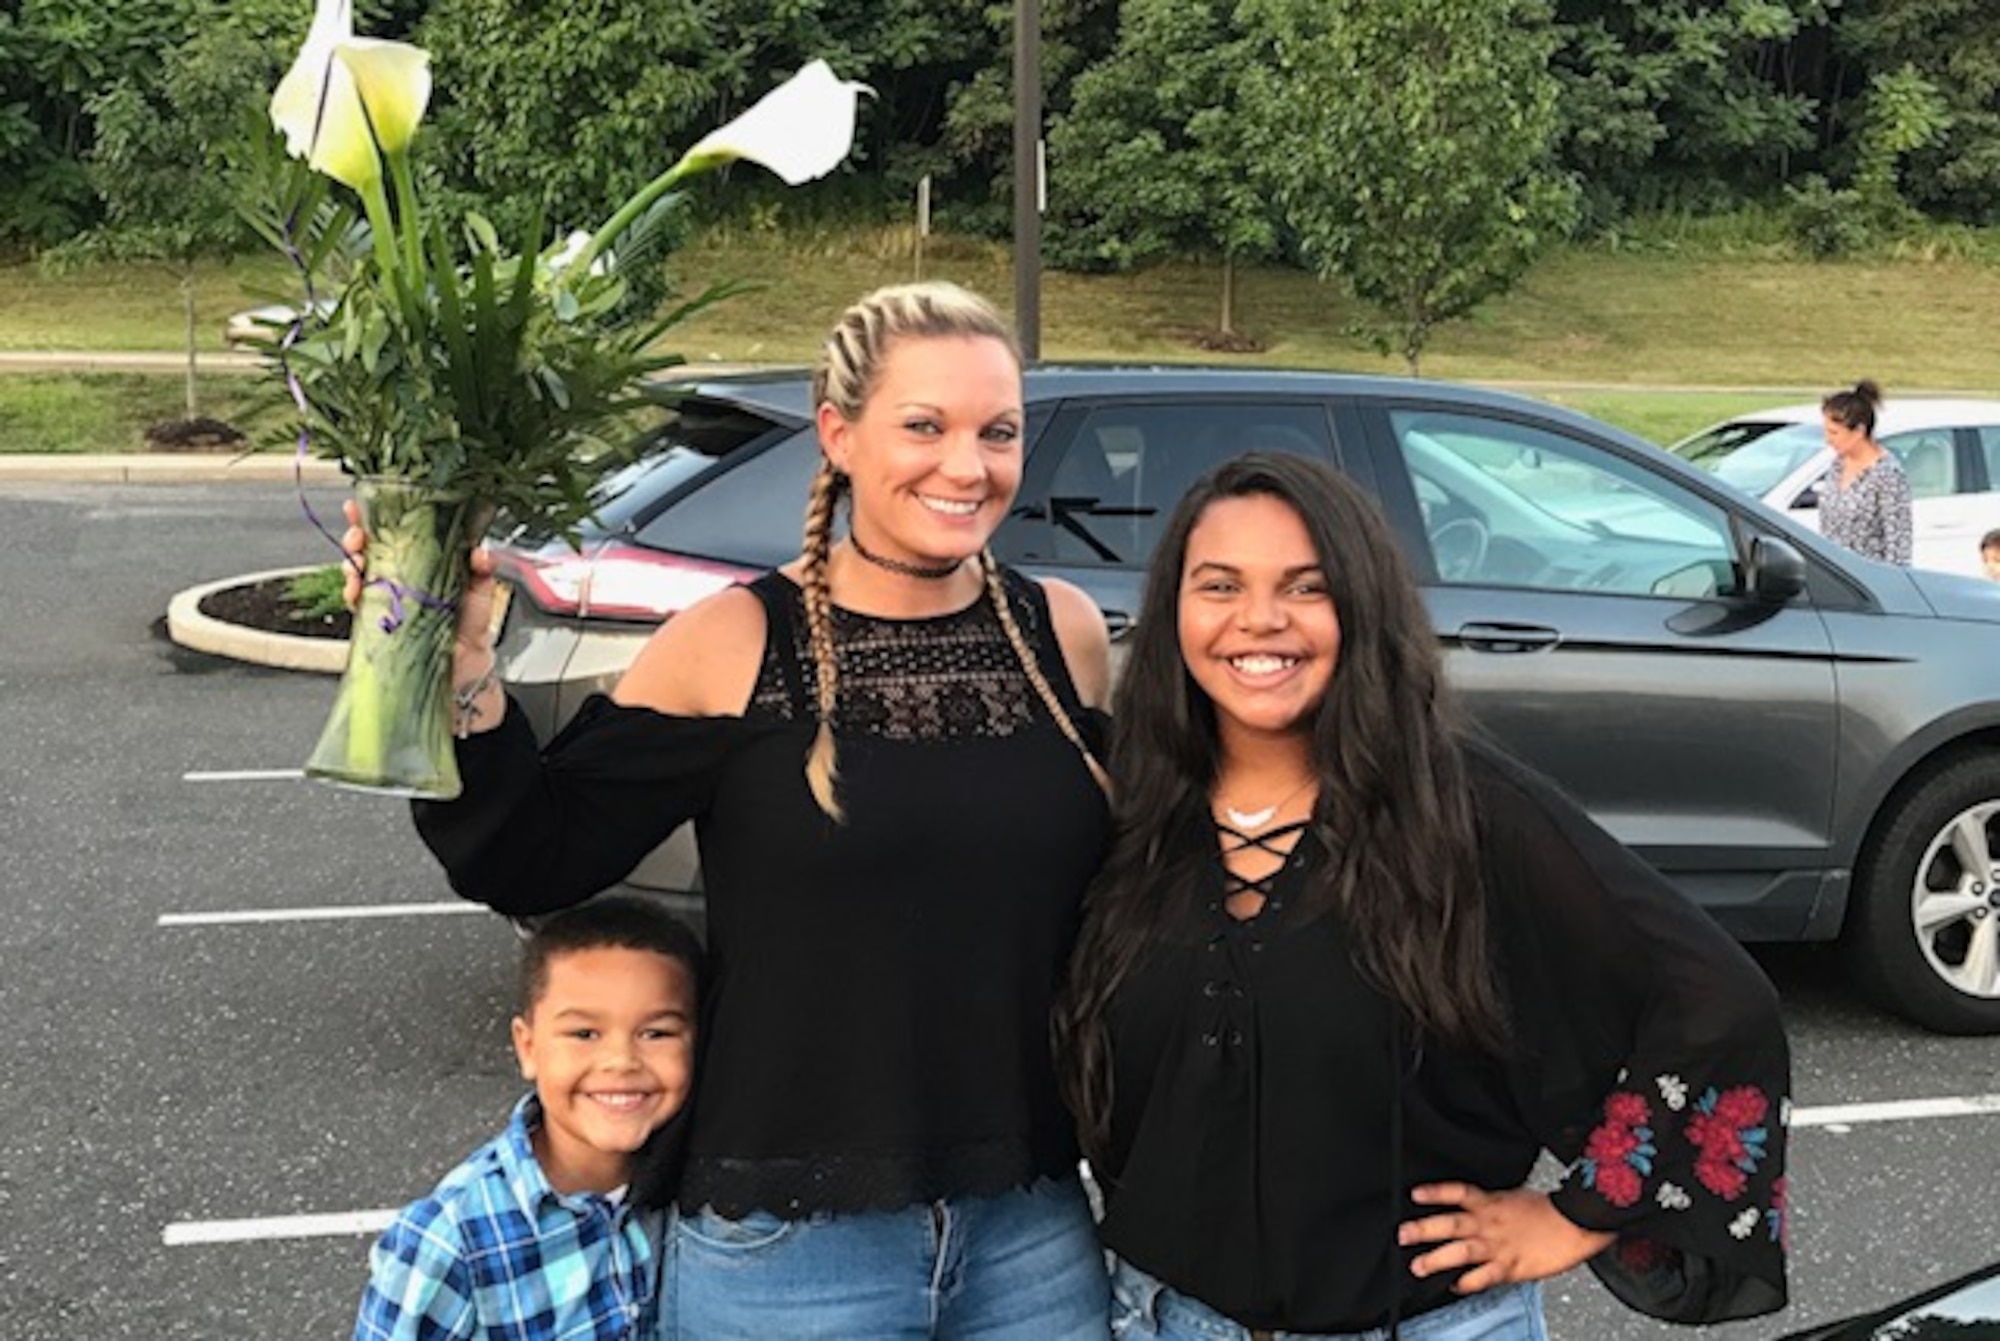 U.S. Air Force Master Sgt. Michelle Humphrey, 87th Air Base Wing Staff Agencies first sergeant, poses with her children, Hayleigh and Kosey Justice.